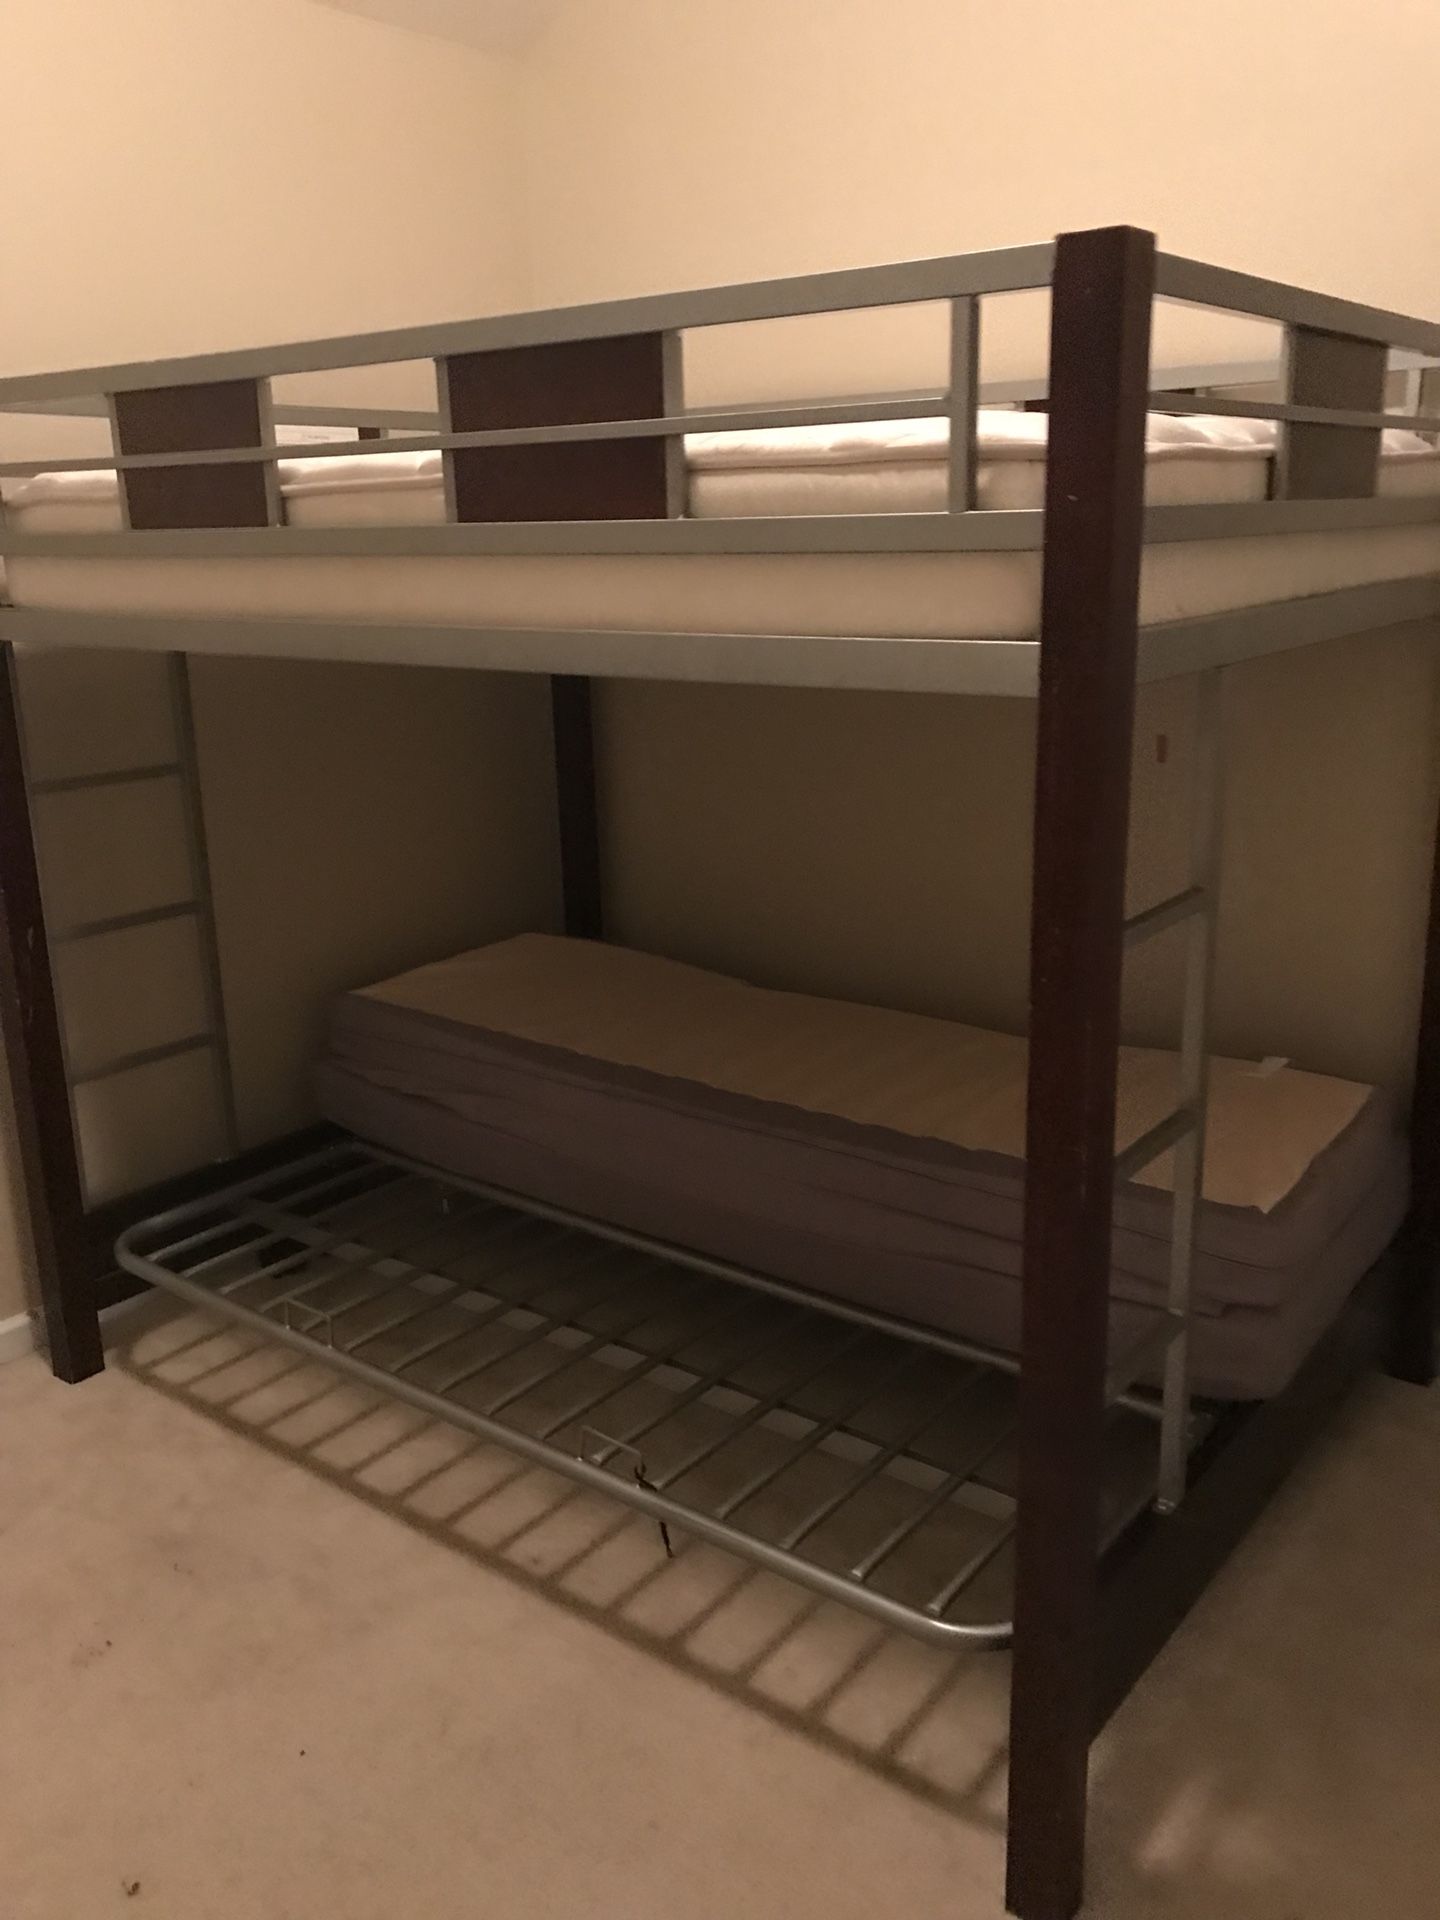 Futon bunk bed must pick up today in union city